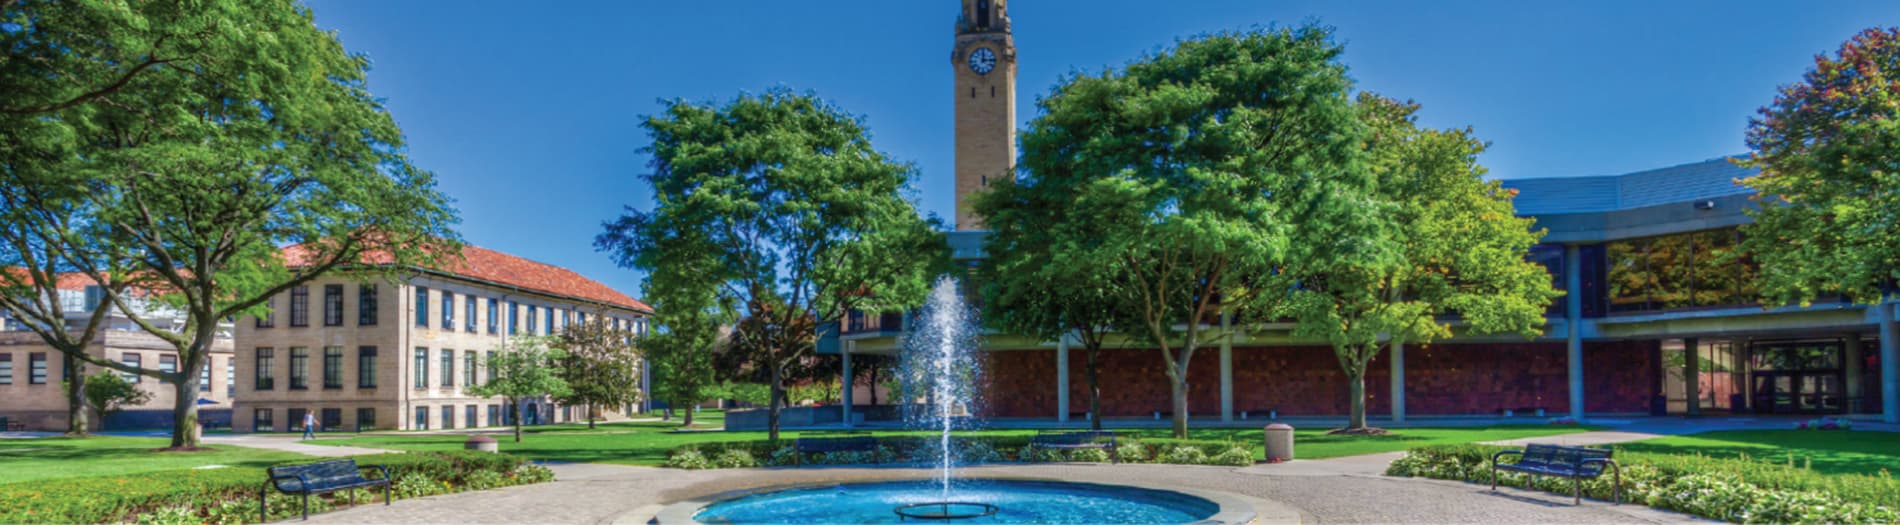 Fountain by student union